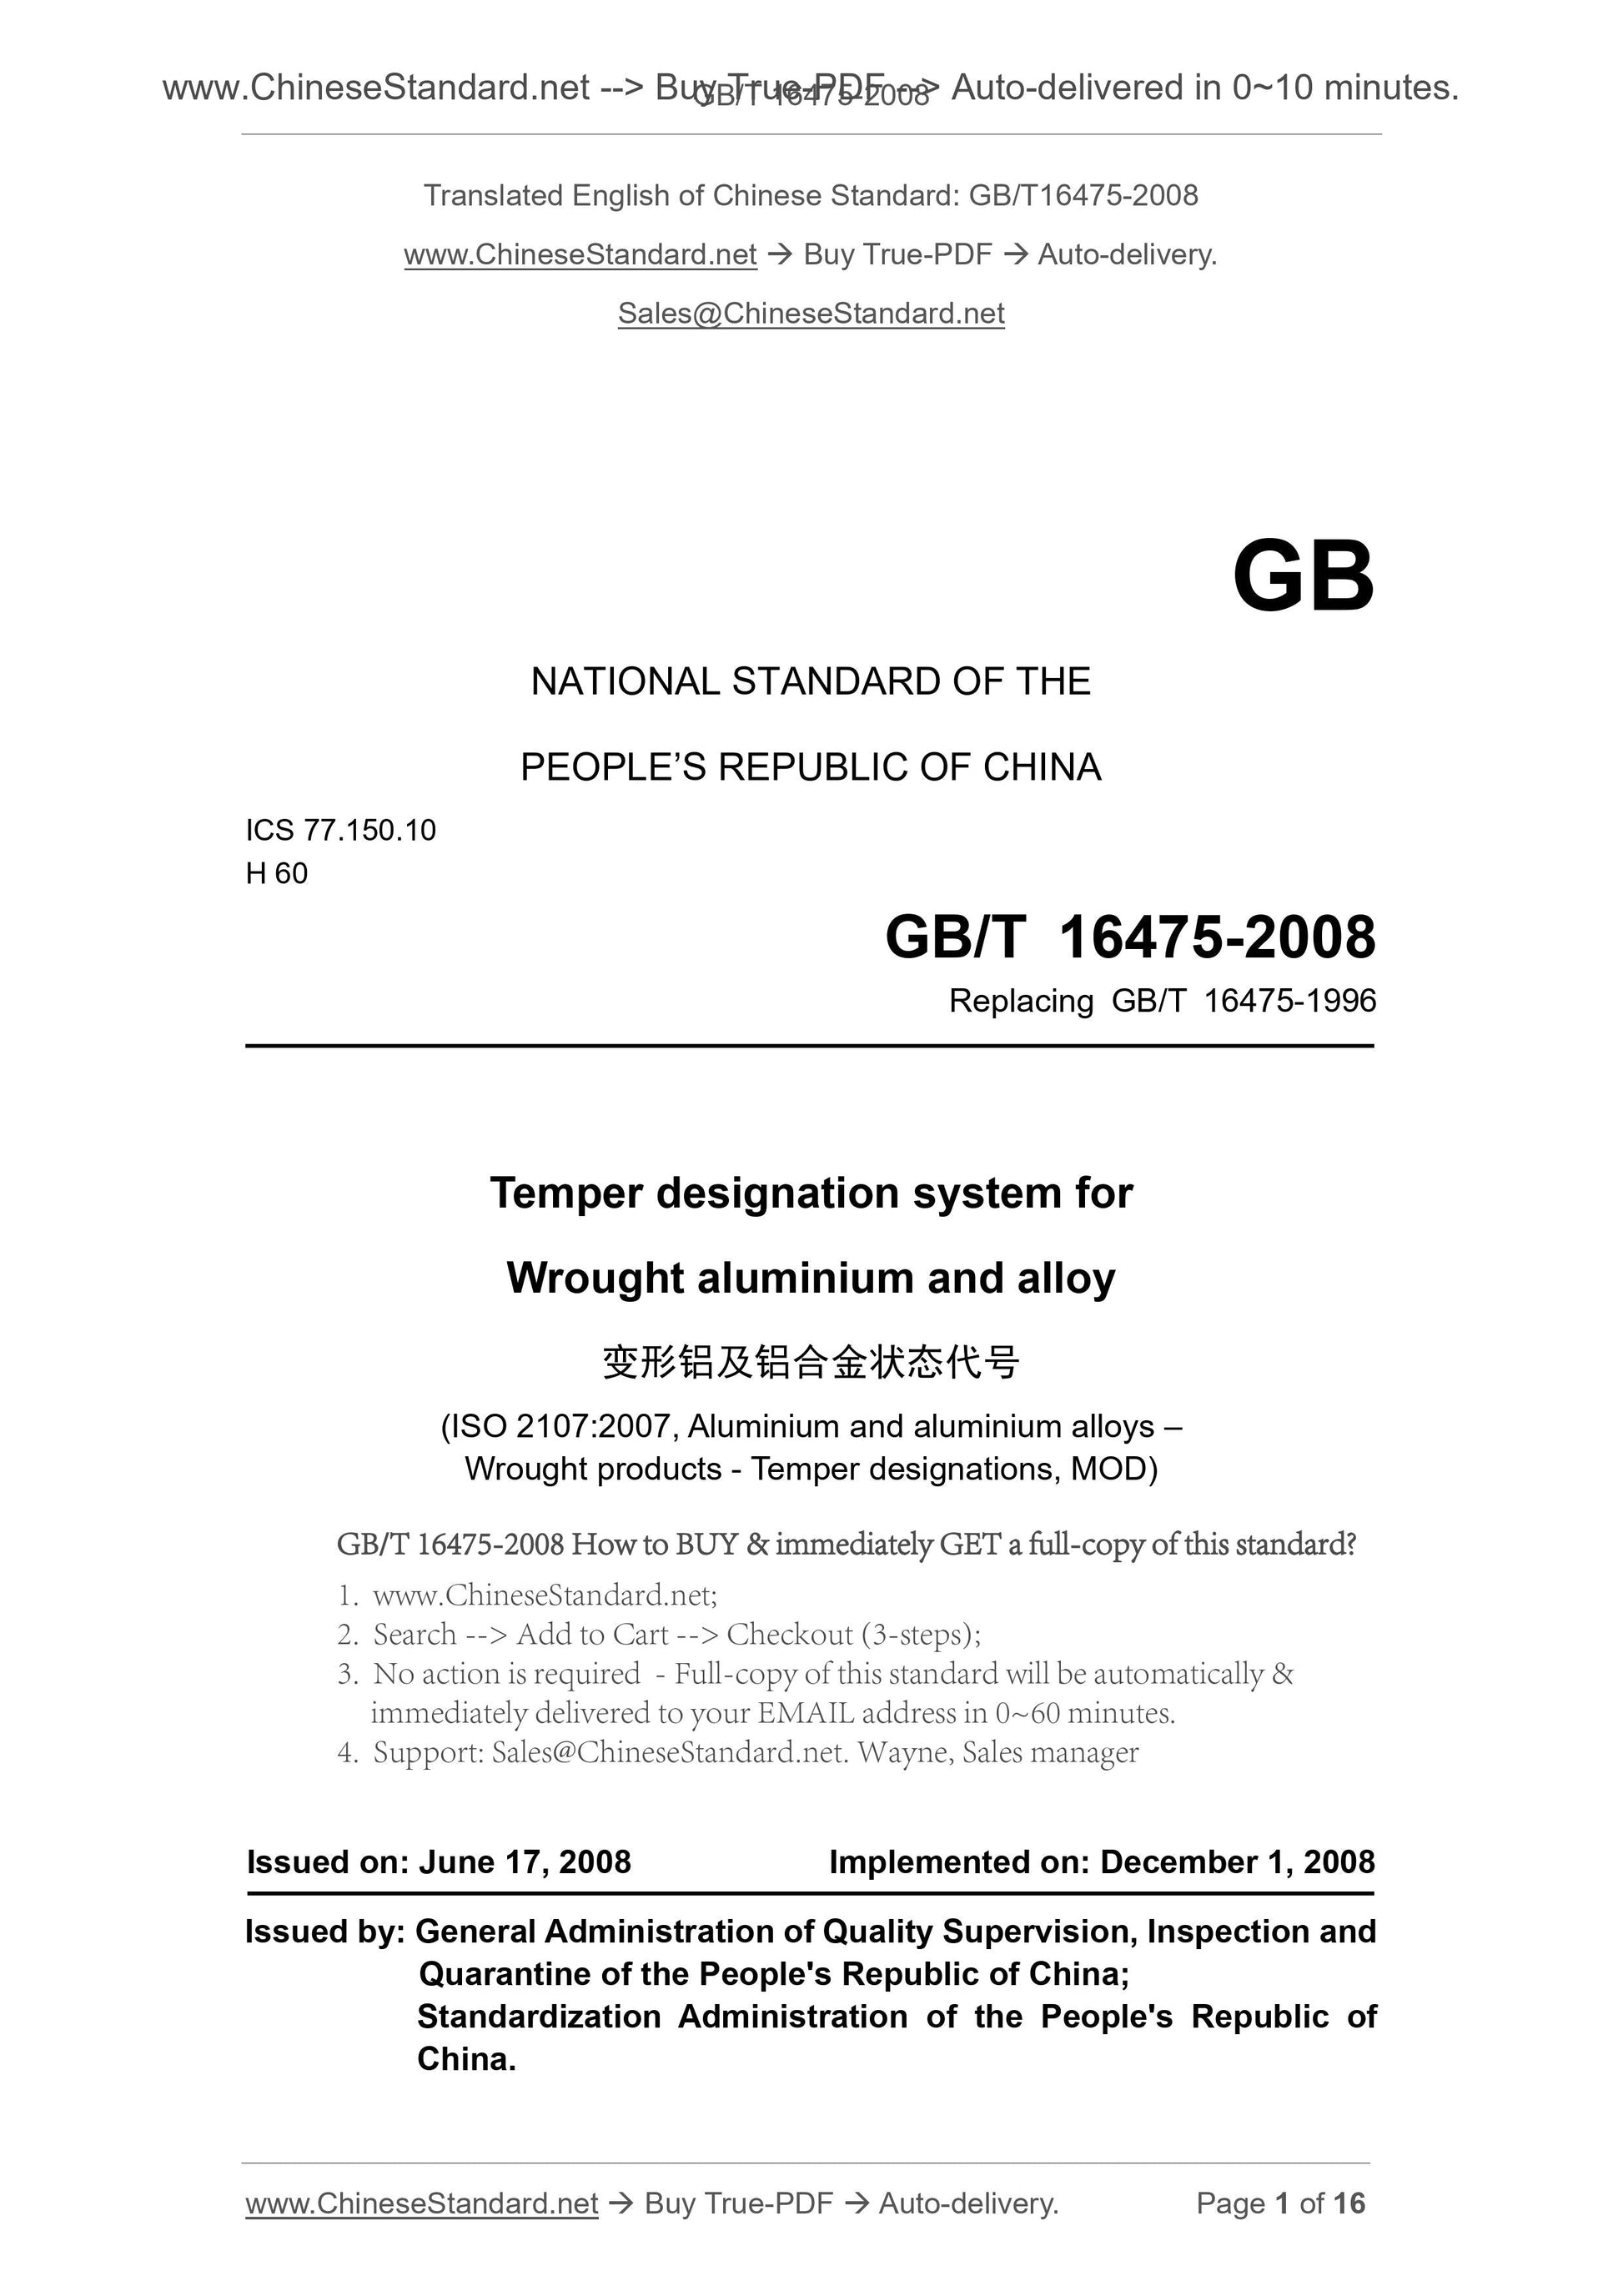 GB/T 16475-2008 Page 1